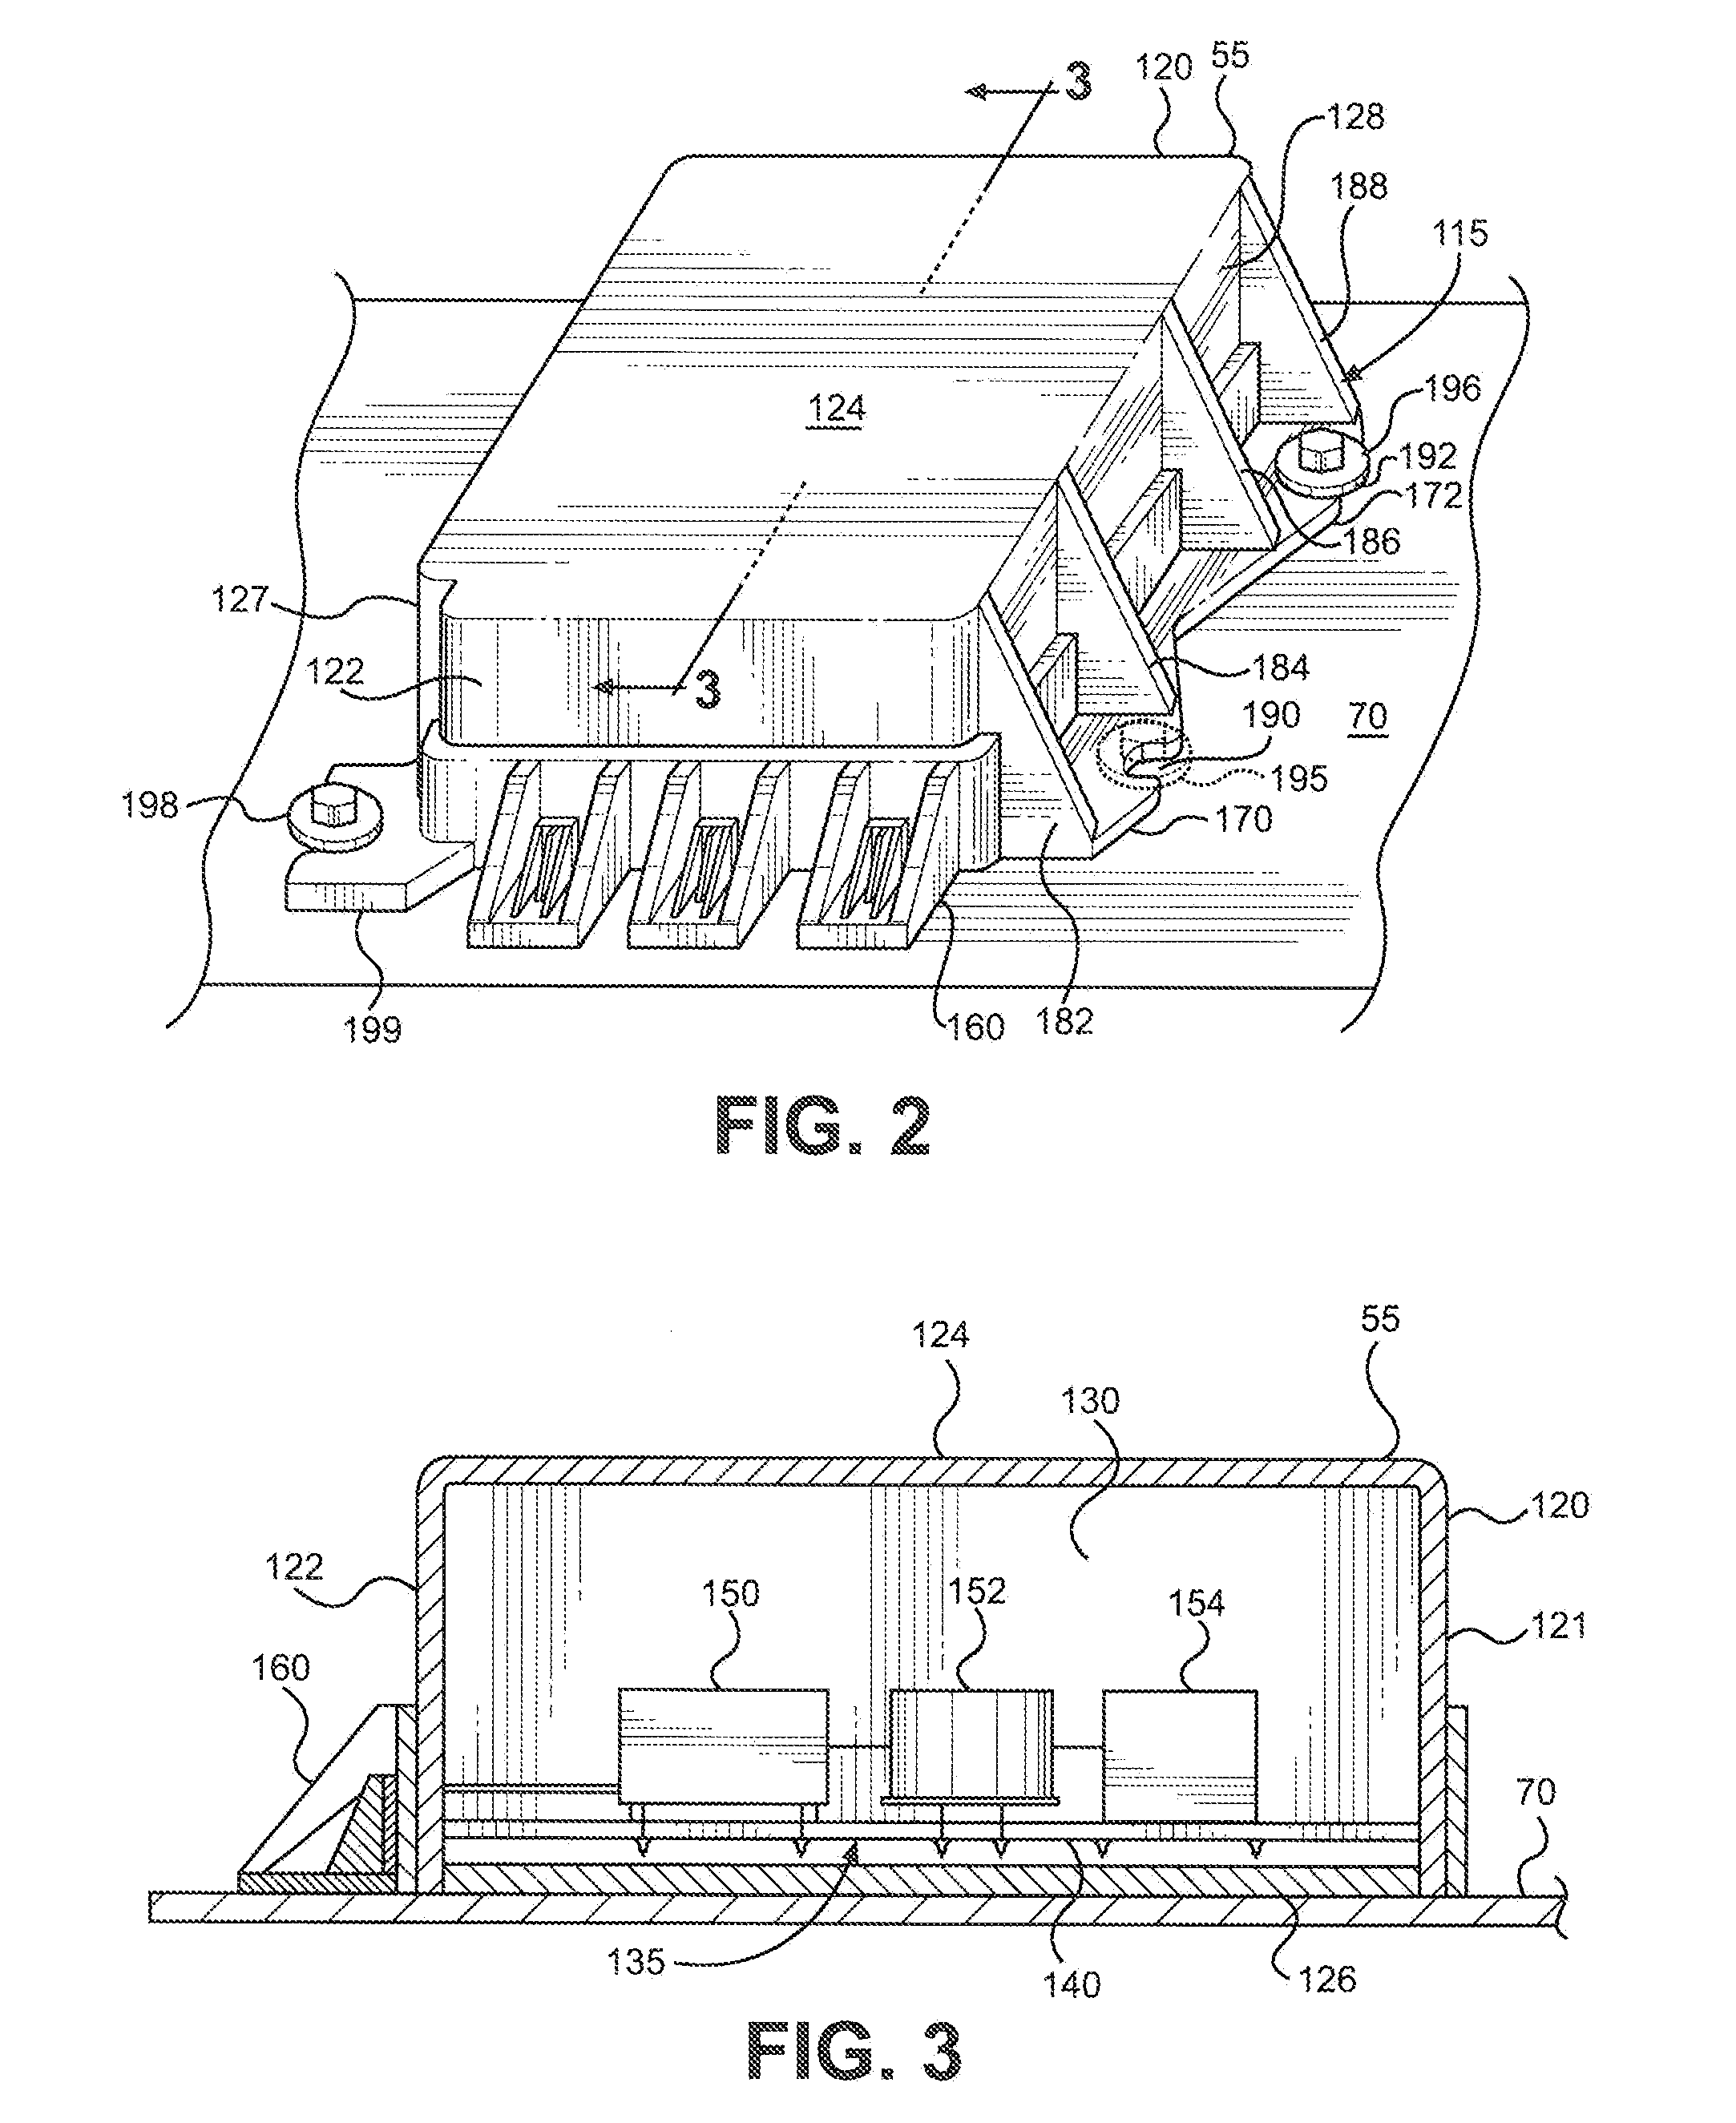 Mounting system for an electronic control module housing in a vehicle